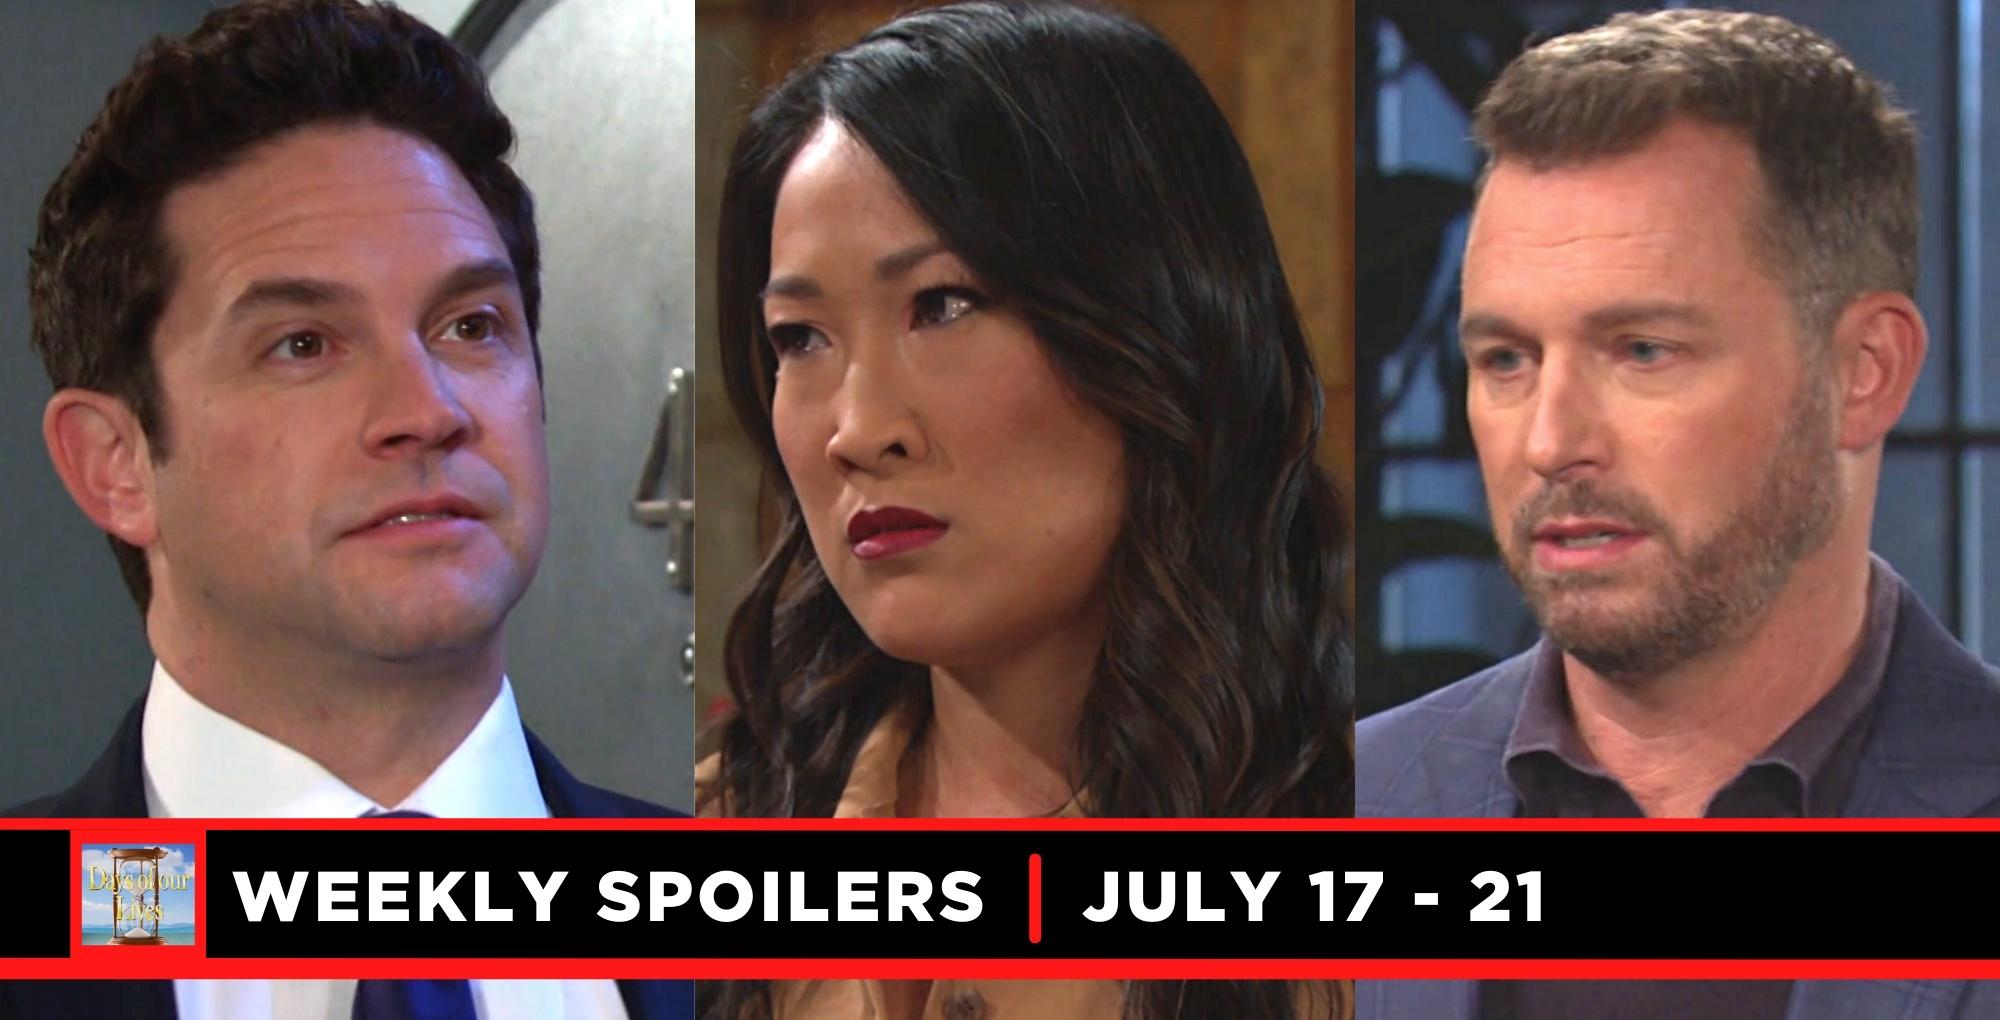 days of our lives spoilers for the week of july 17-21, 2023, three images, stefan, melinda, brady.